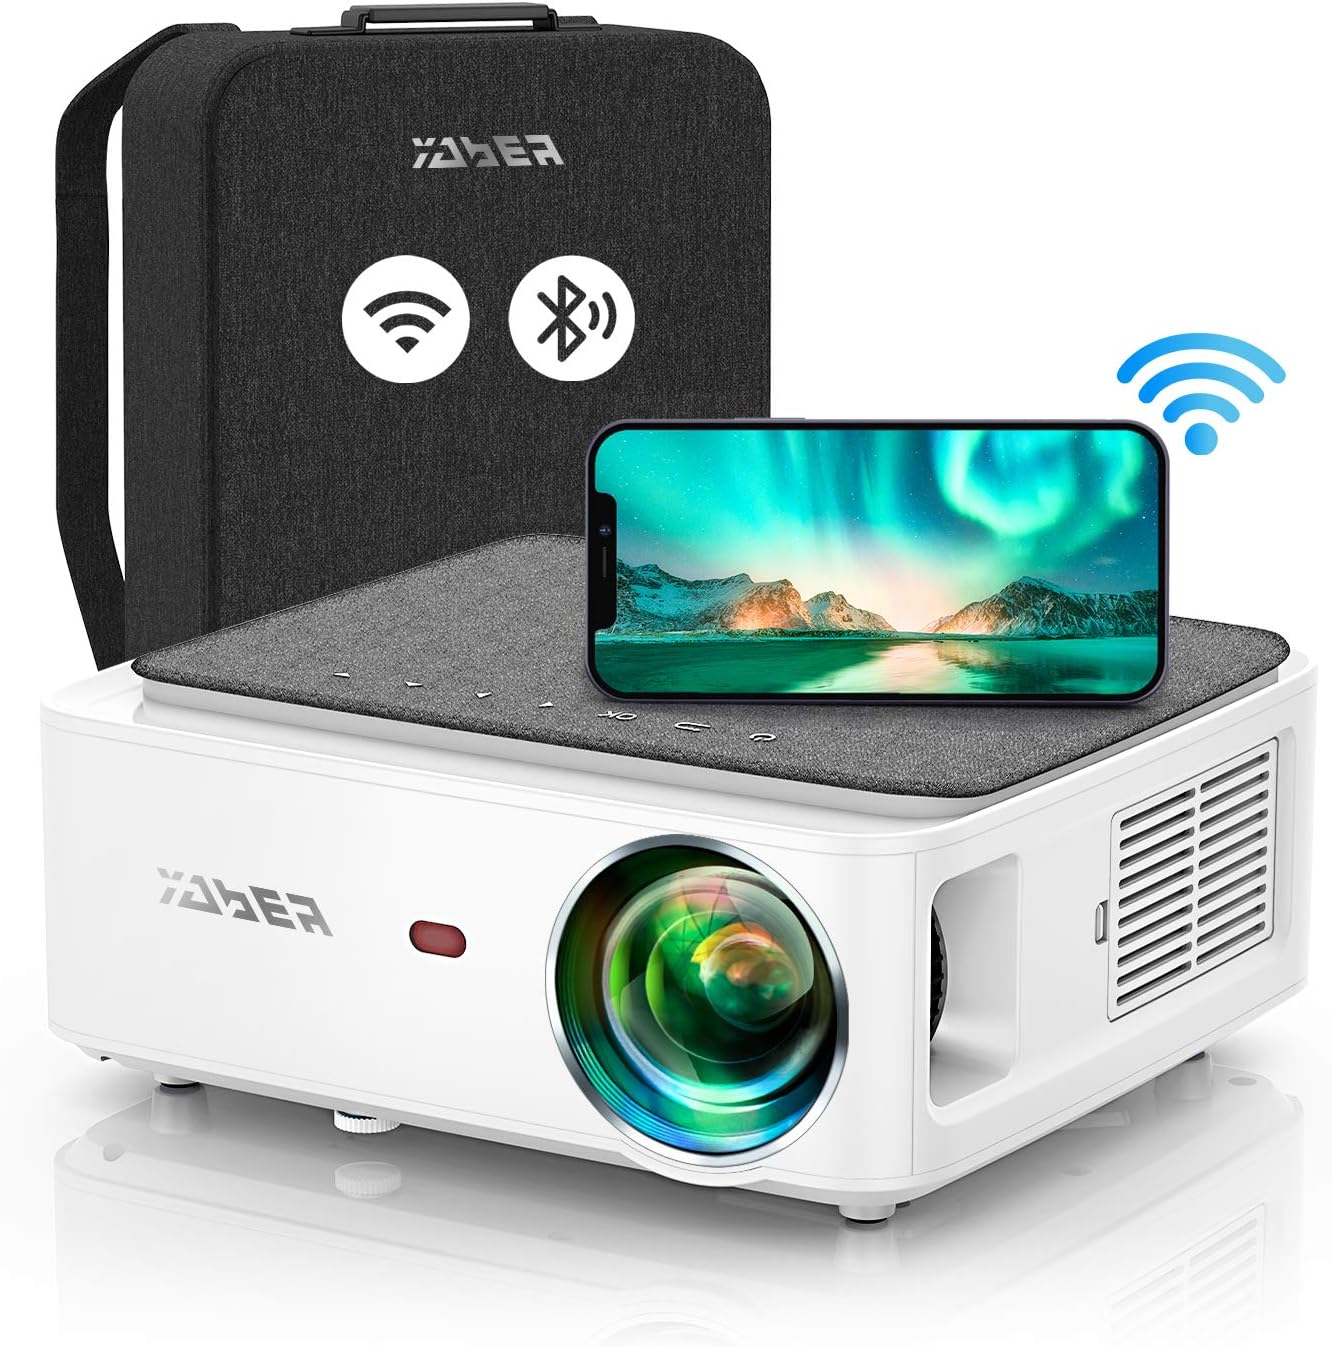 [Electric Focus]Mini Projector with 5G WiFi and Bluetooth 5.2,YABER 15000  Lumen 1080P Outdoor Projector Support ±40° Keystone Correction,Portable